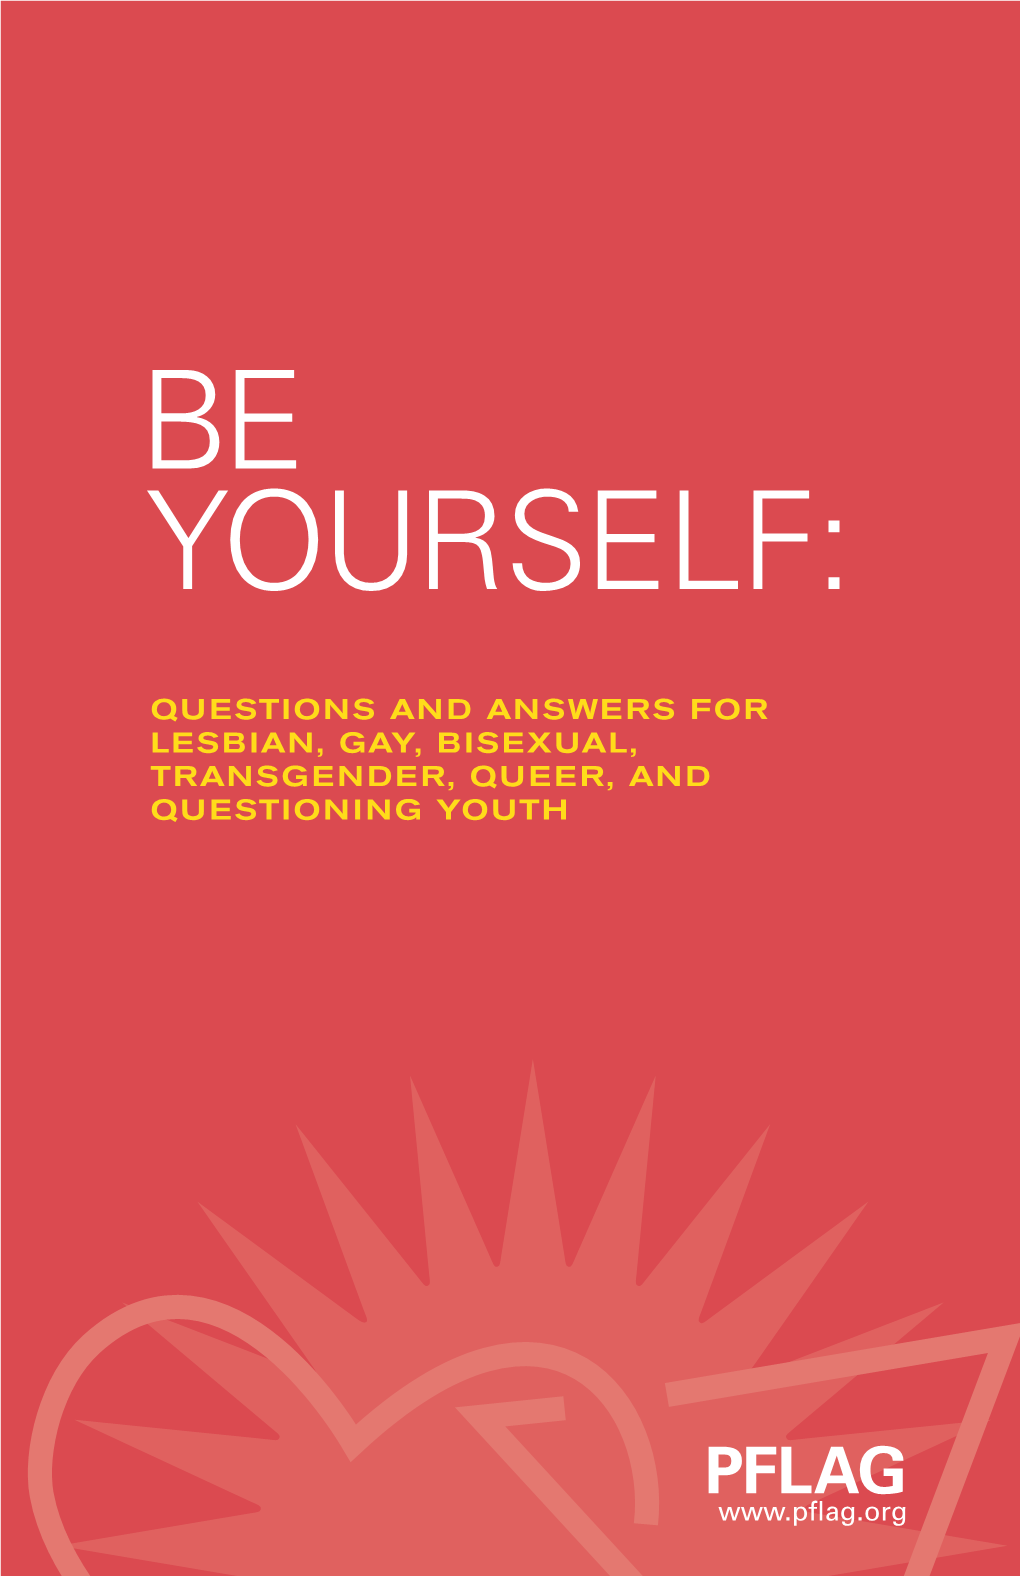 Be Yourself: Questions & Answers for Lesbian, Gay, Bisexual, Transgender, Queer, and Questioning Youth Is Copyrighted